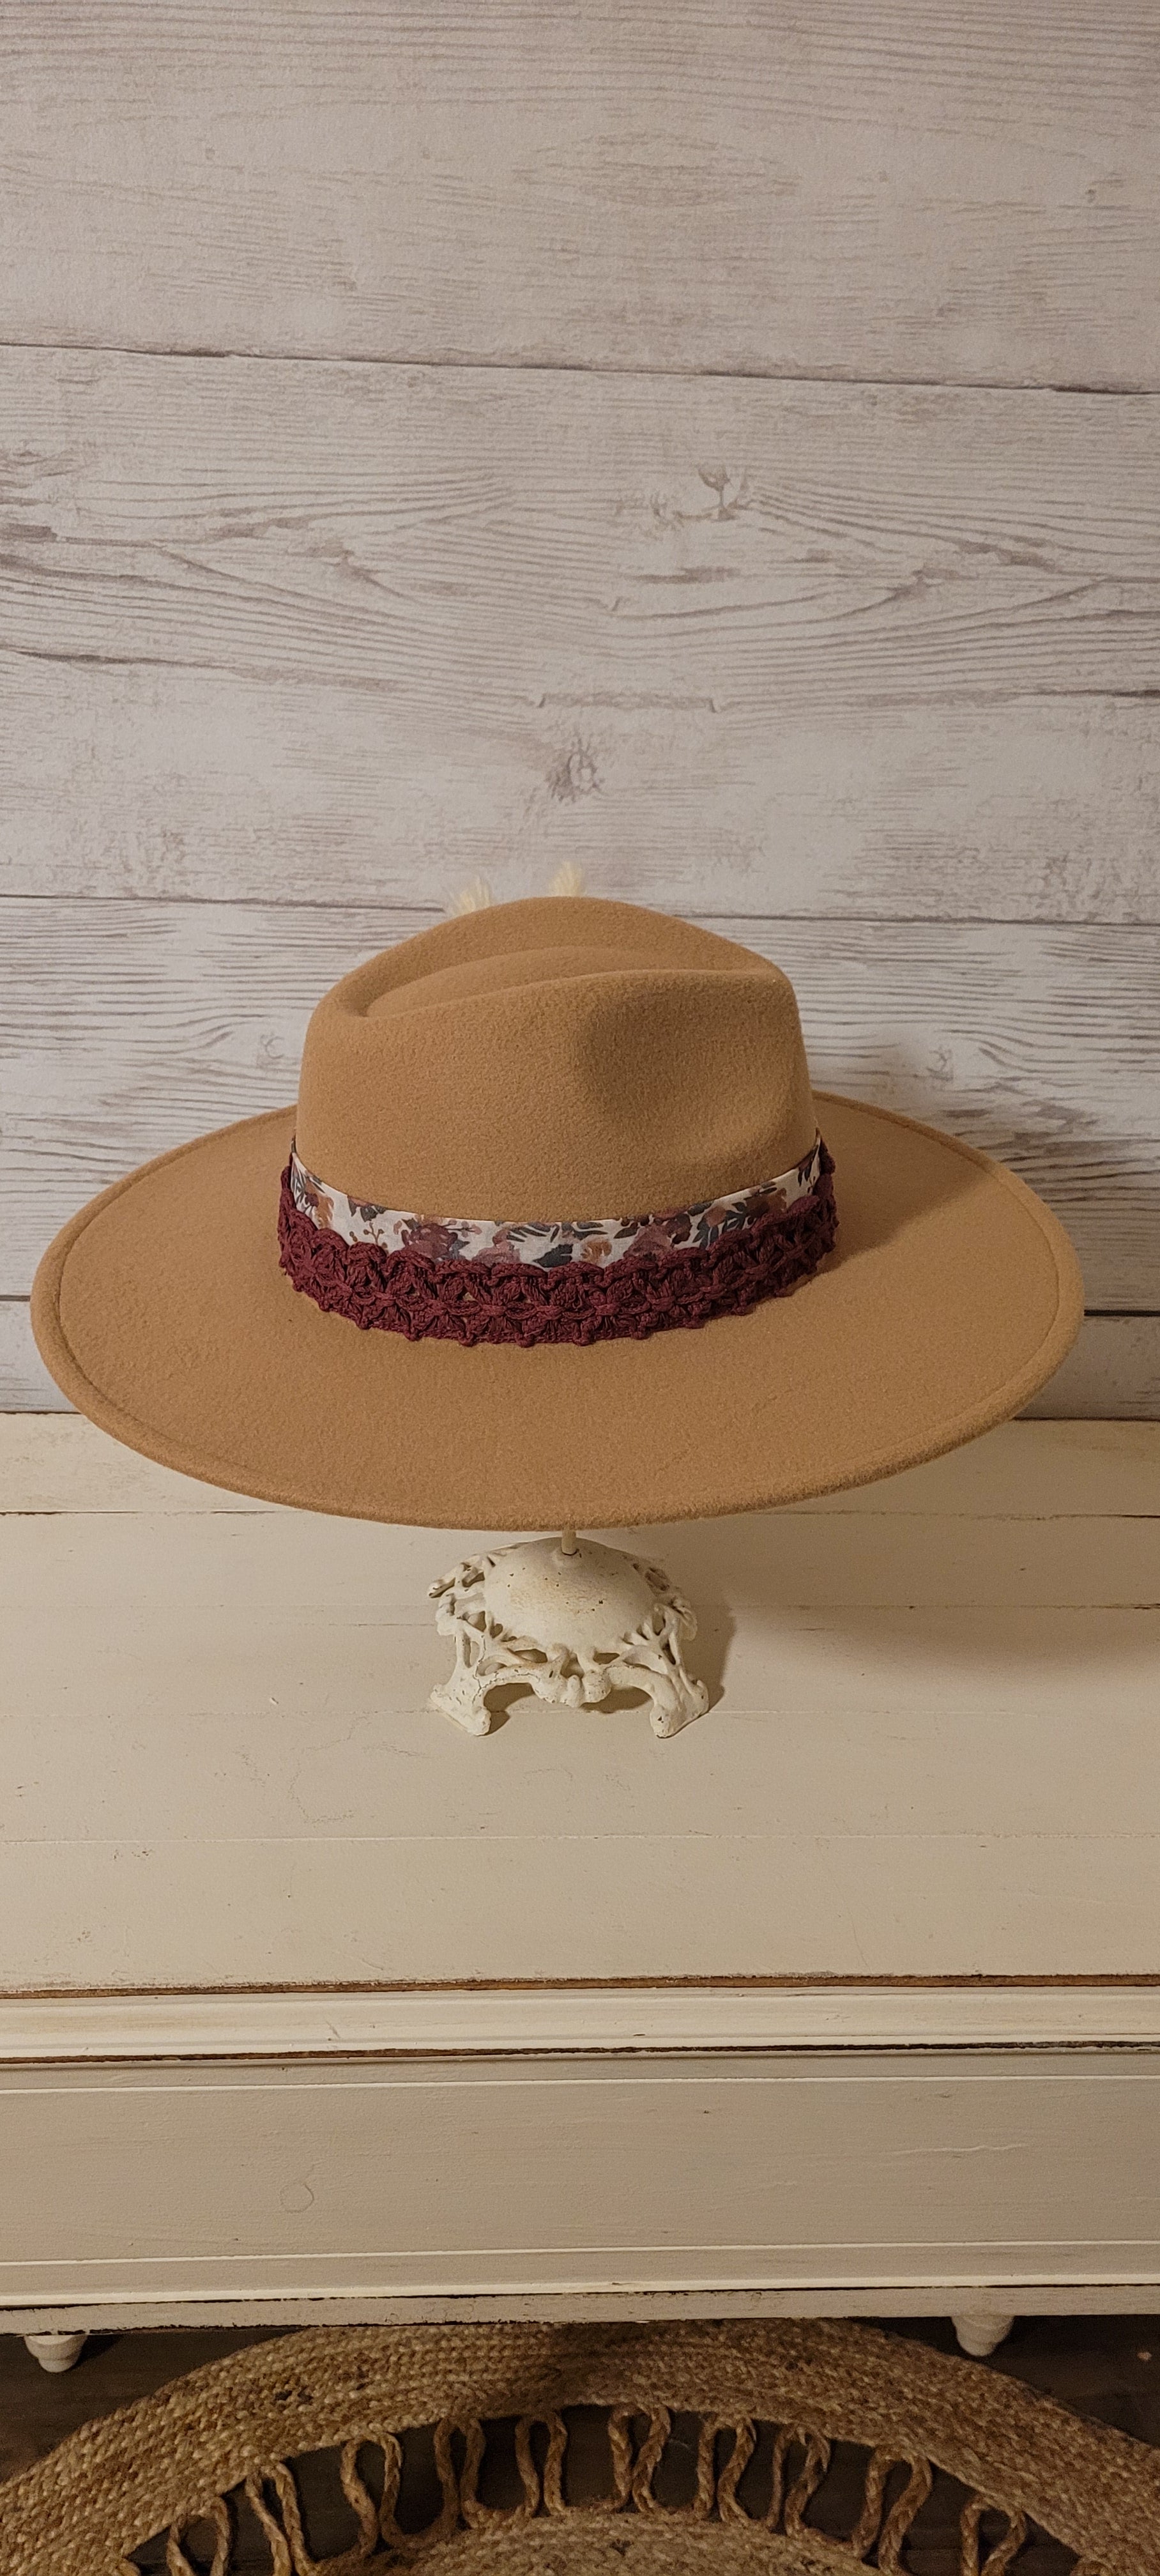 Sheer floral ribbon, lace ribbon, pampas, cattails, pine cones Felt hat Flat brim 100% polyester Ribbon drawstring for hat size adjustment Head Circumference: 24" Crown Height: 5" Brim Length: 15.75" Brim Width: 14.5" Branded & numbered inside crown Custom designed by Kayla